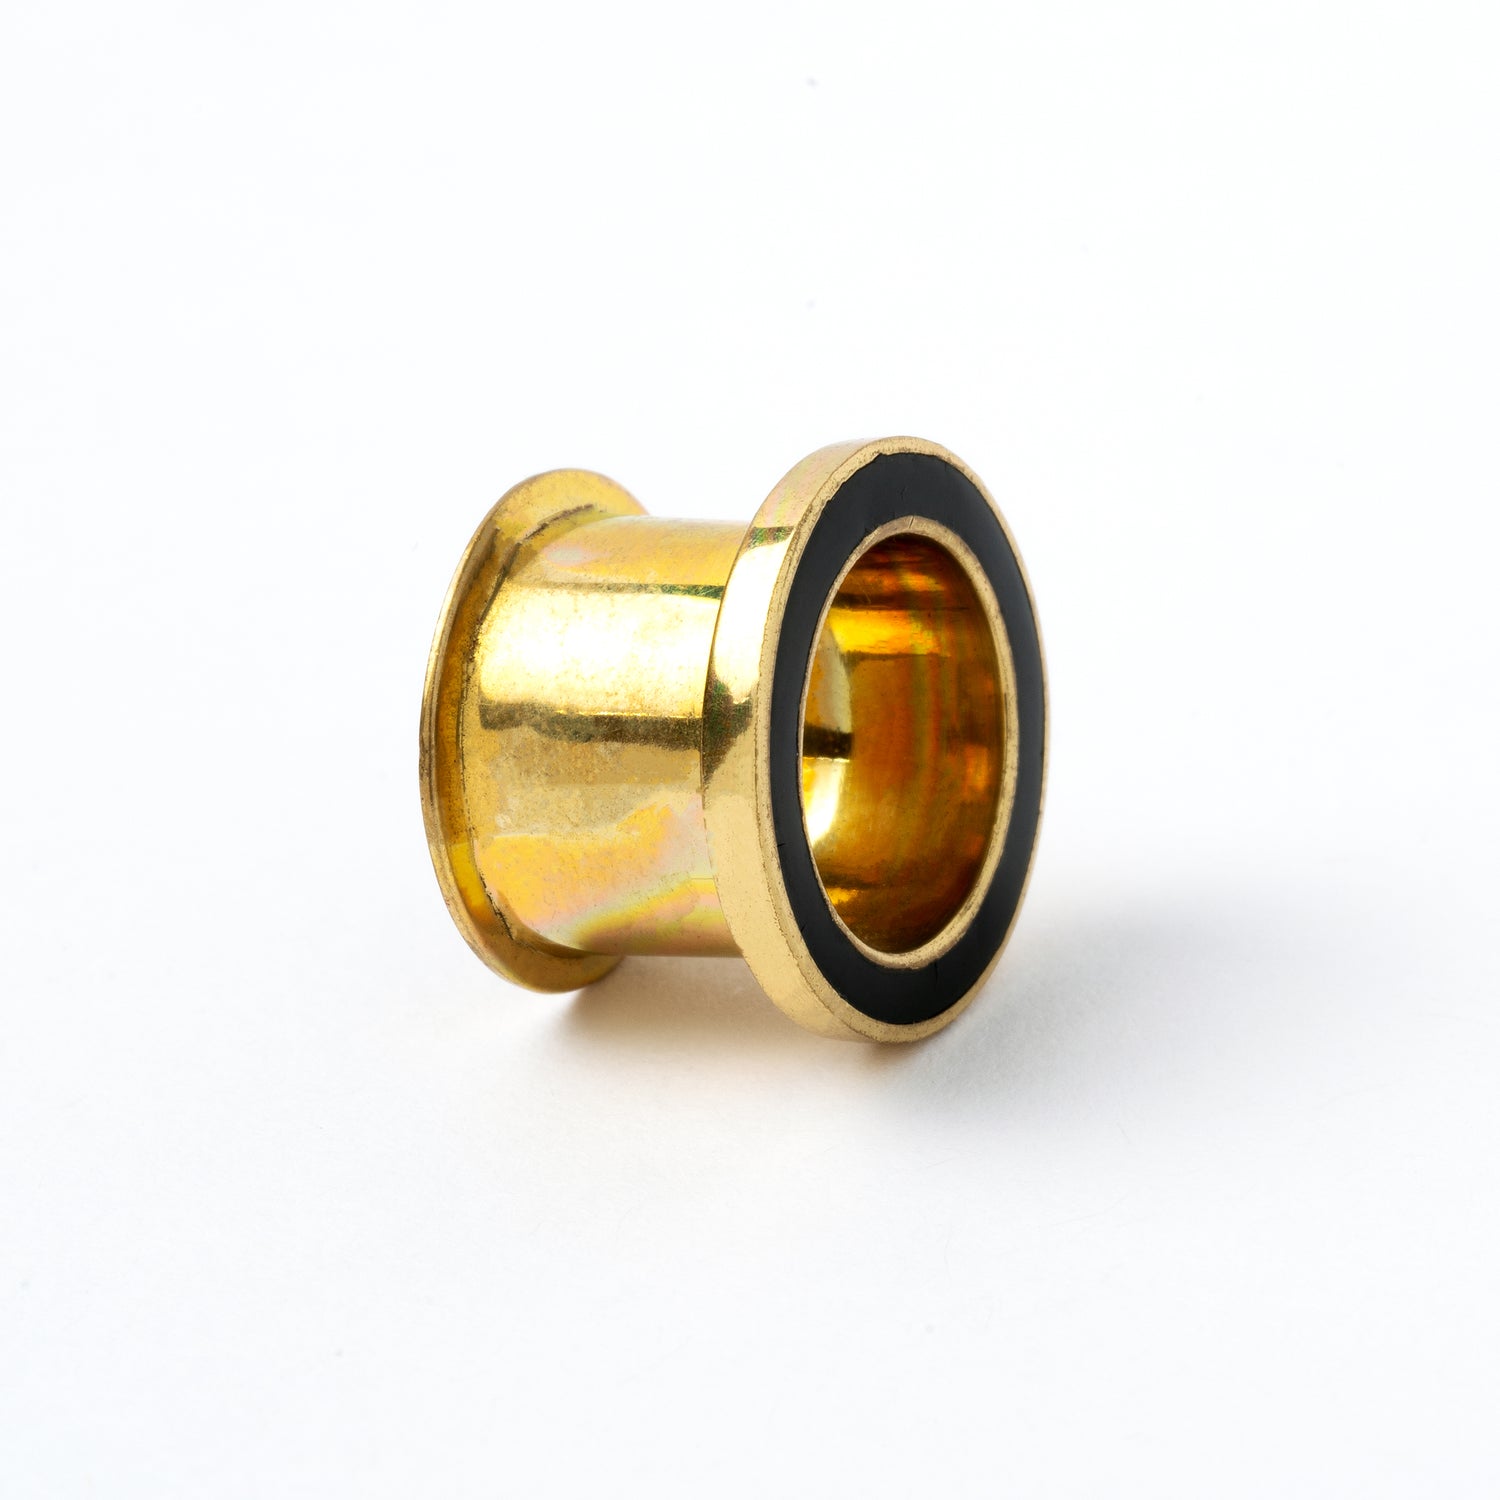 Golden brass plug tunnel with black resin inlay side view